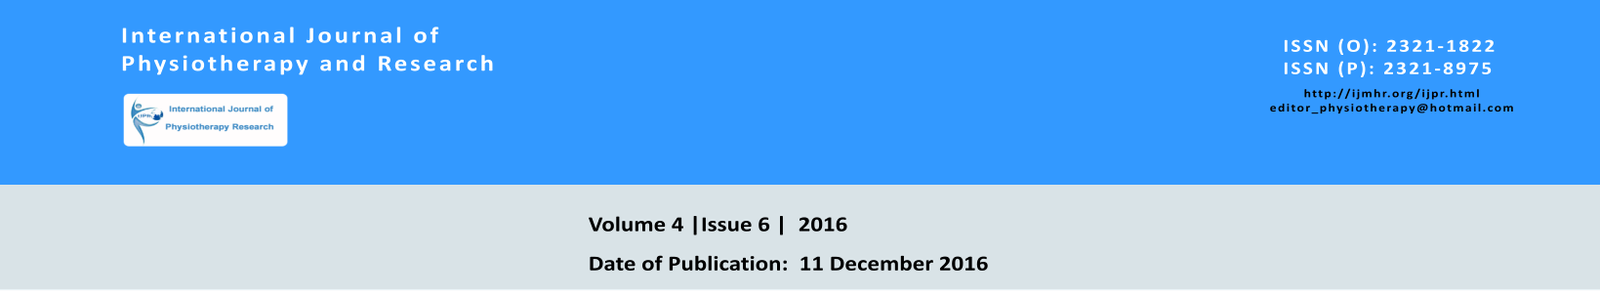 International Journal of Physiotherapy and Research ISSN (O): 2321-1822  ISSN (P): 2321-8975 Volume 4 |Issue 6 |  2016 Date of Publication:  11 December 2016 http://ijmhr.org/ijpr.html editor_physiotherapy@hotmail.com